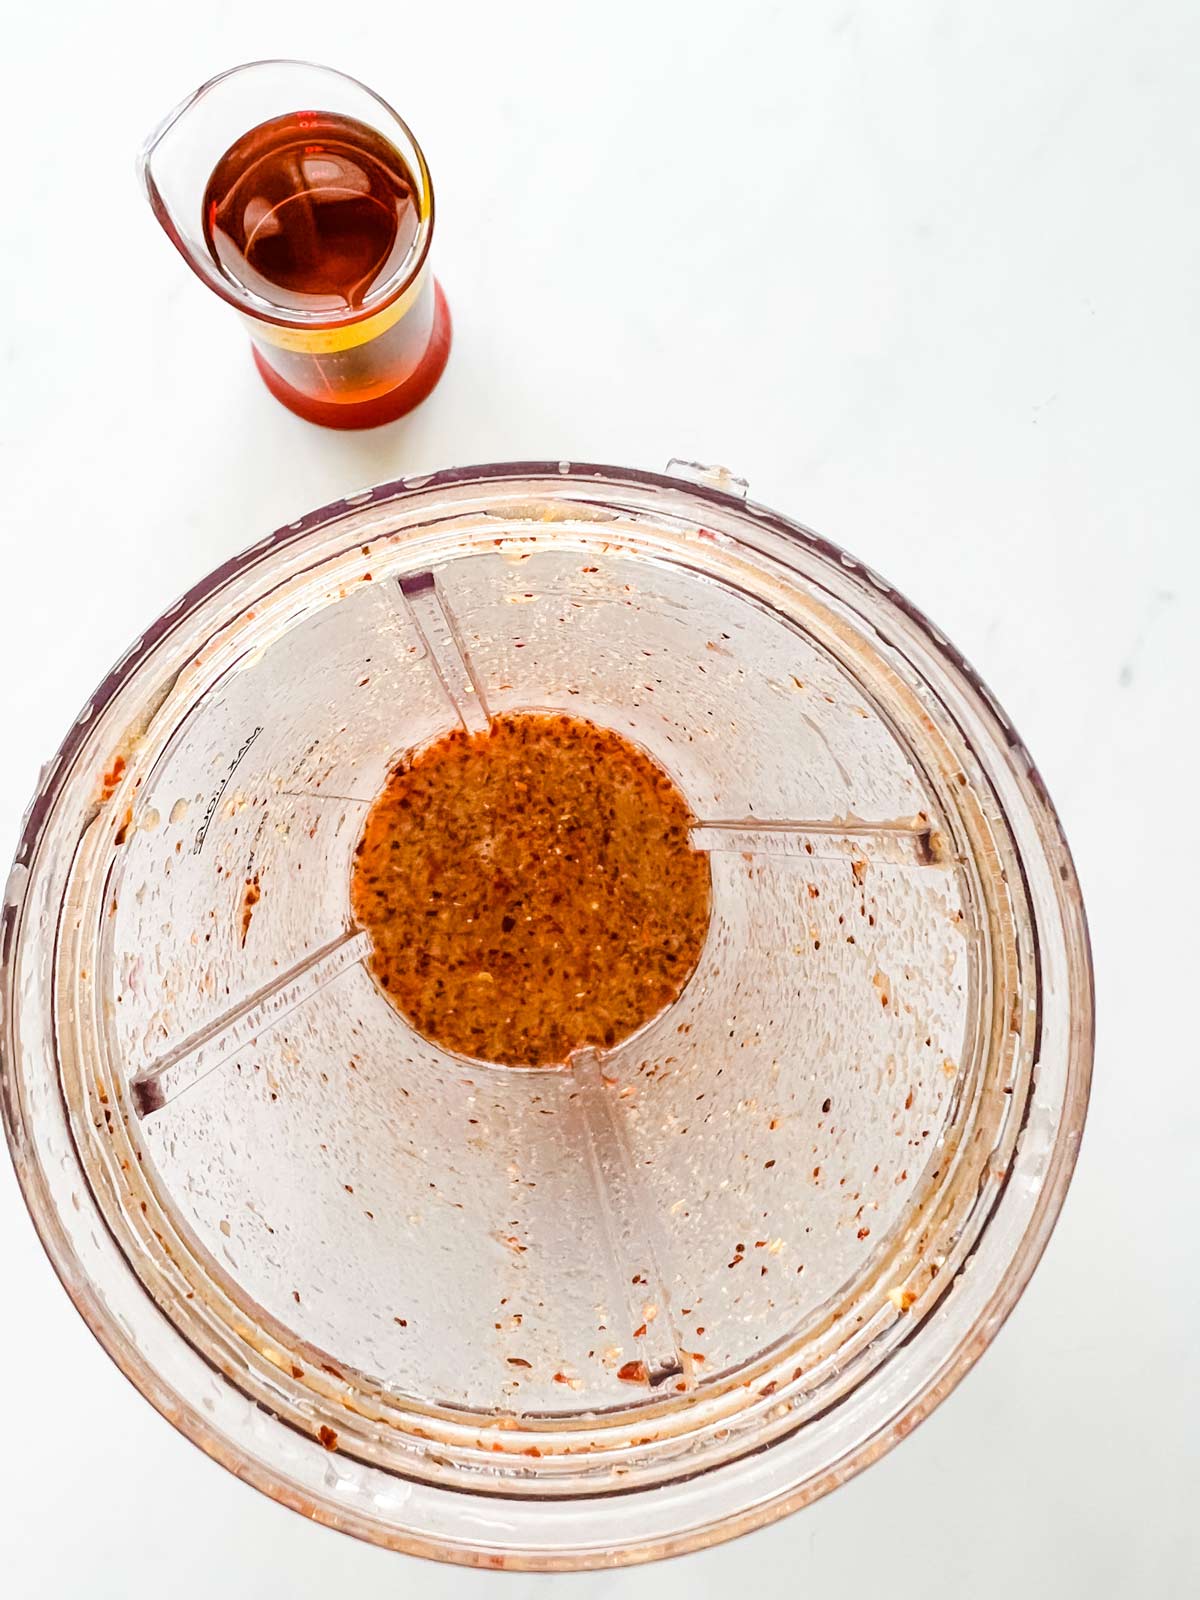 Mixed lime juice, fish sauce, ginger, and red pepper flakes in a blender.